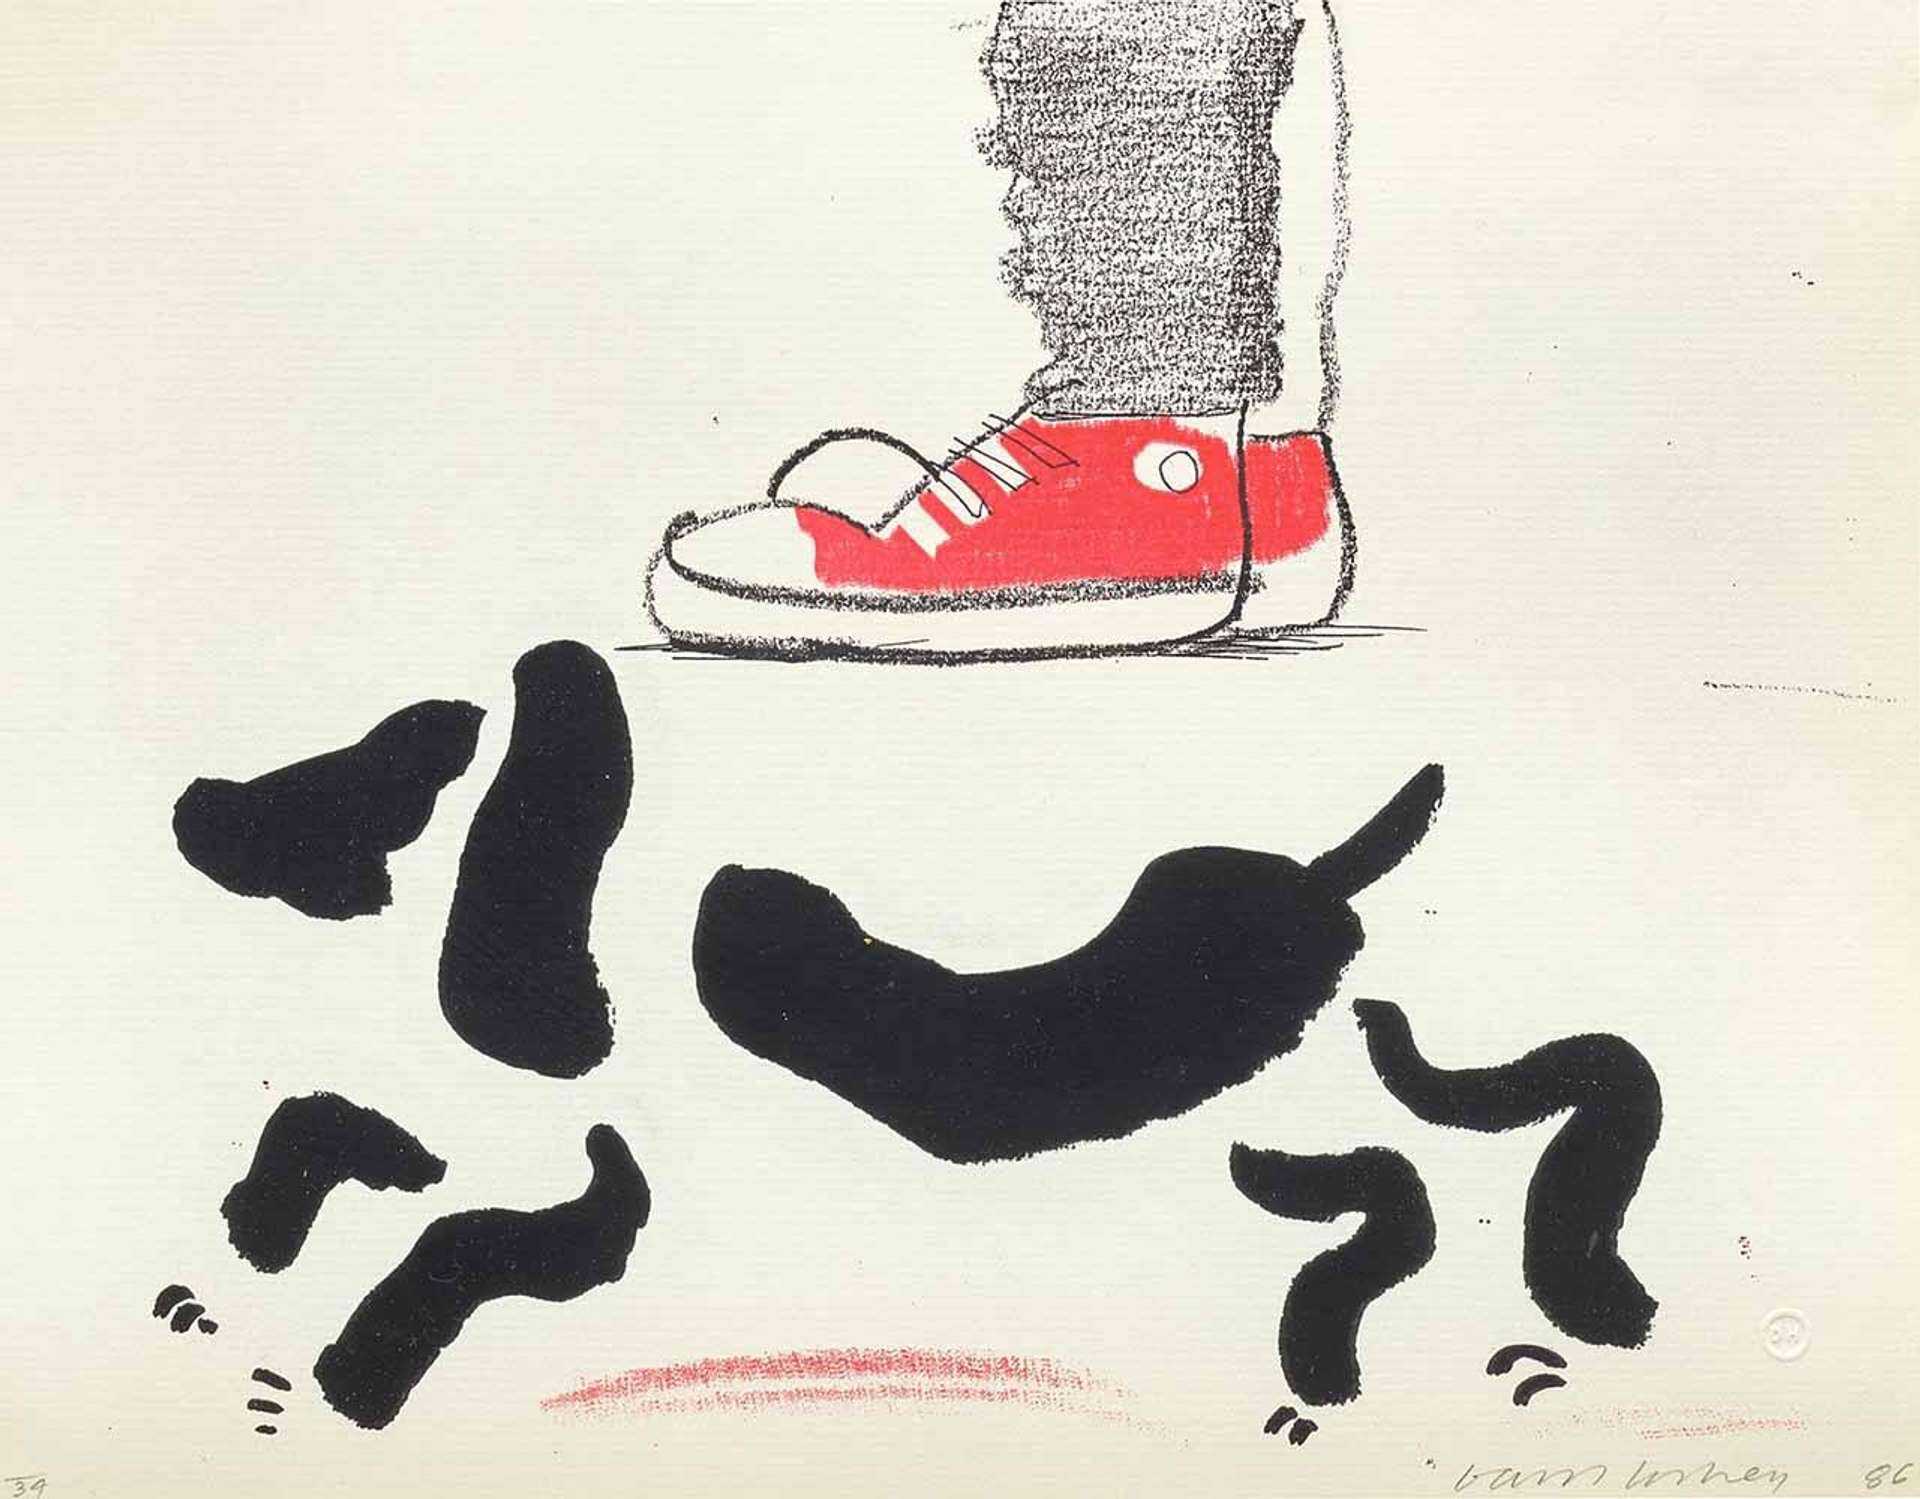 David Hockney’s Ian And Heinz. A digital print of a black dog with a man’s red sneakers in the background.